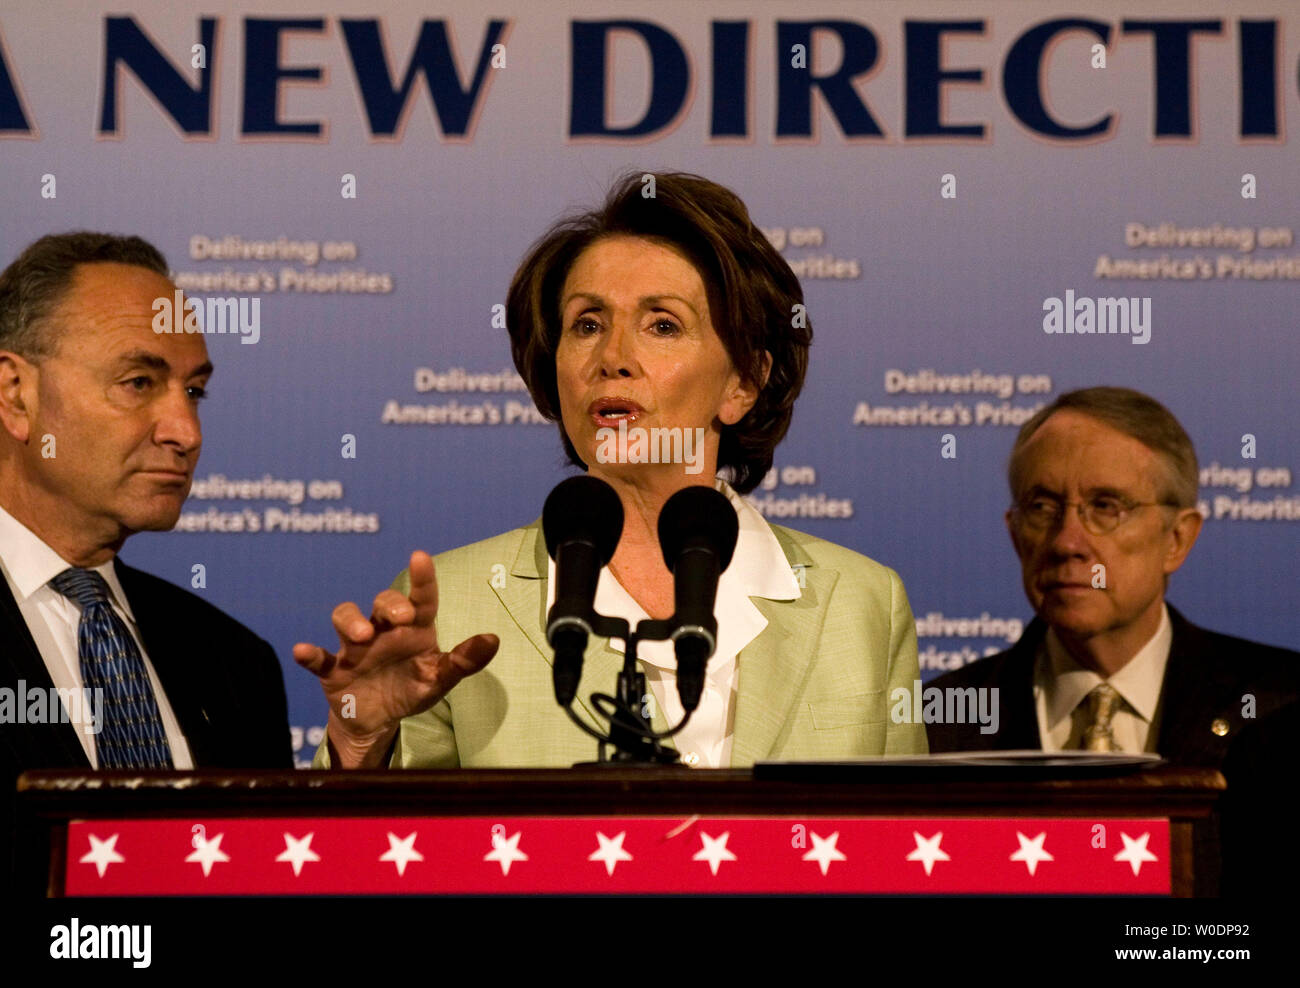 Speaker of the House Nancy Pelosi (D-CA) discusses the legislative accomplishments of and obstacles to the new Democratic Congress over the past six months, as Se. Charles Schumer (D-NY) and Senate Majority Leader Harry Reid (D-NV) look on, at Capitol Hill in Washington on June 29, 2007.     (UPI Photo/David Brody) Stock Photo